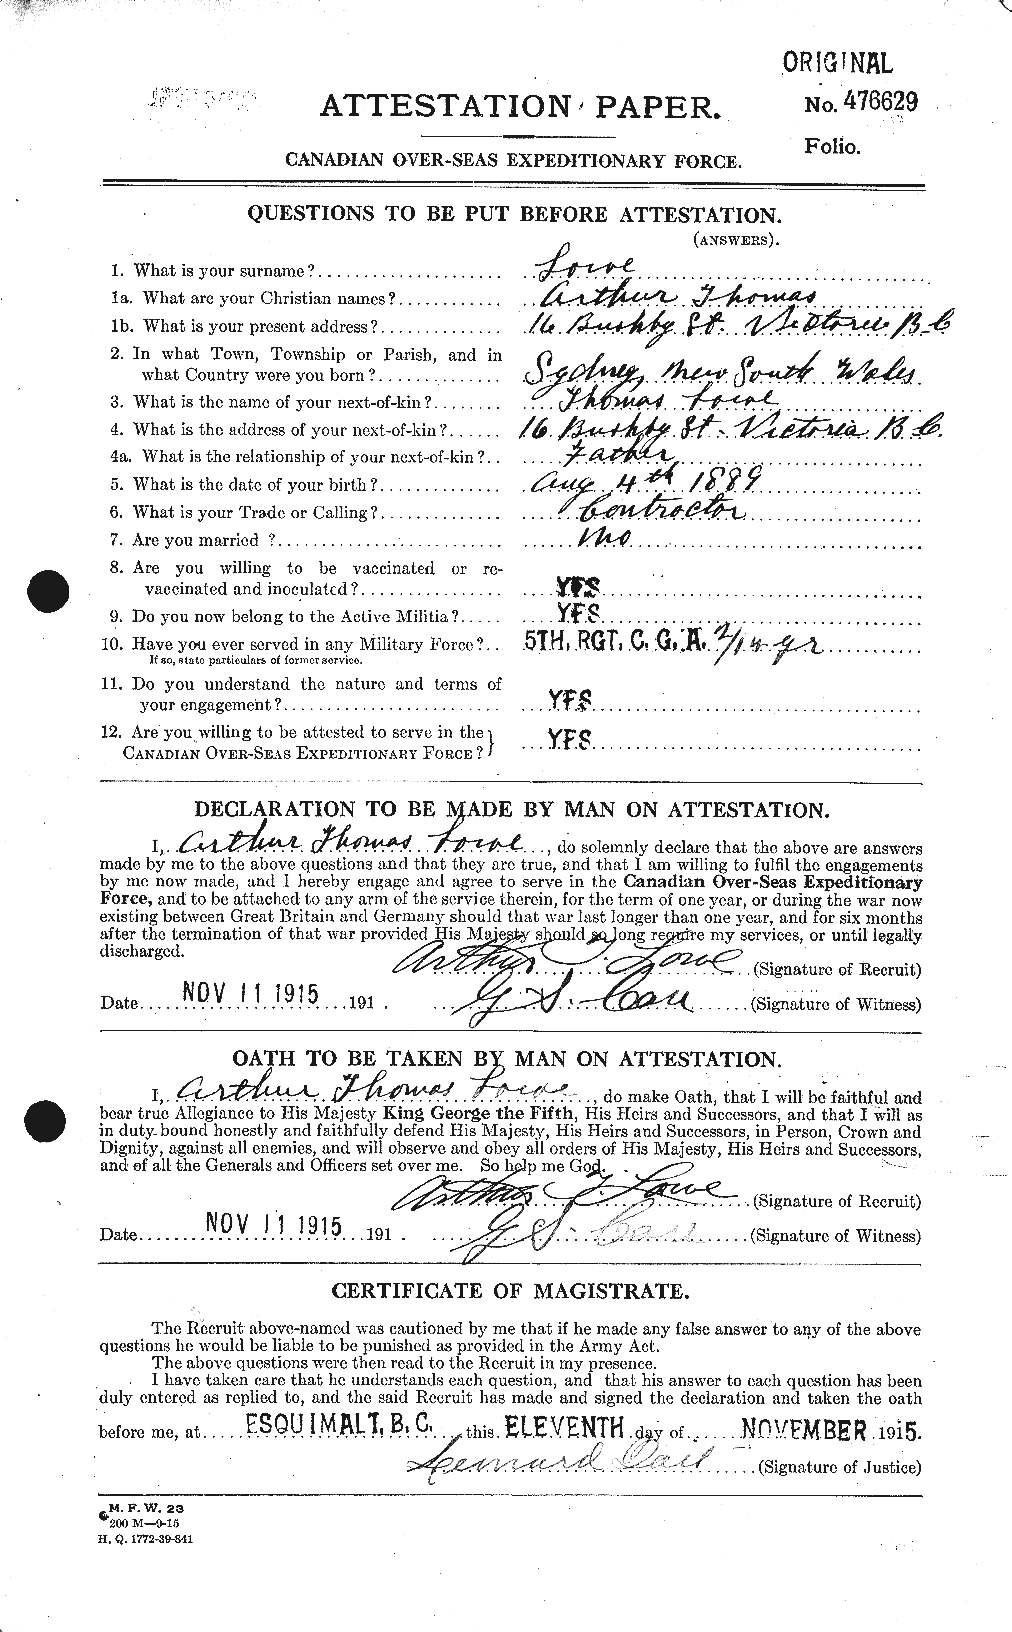 Personnel Records of the First World War - CEF 469510a